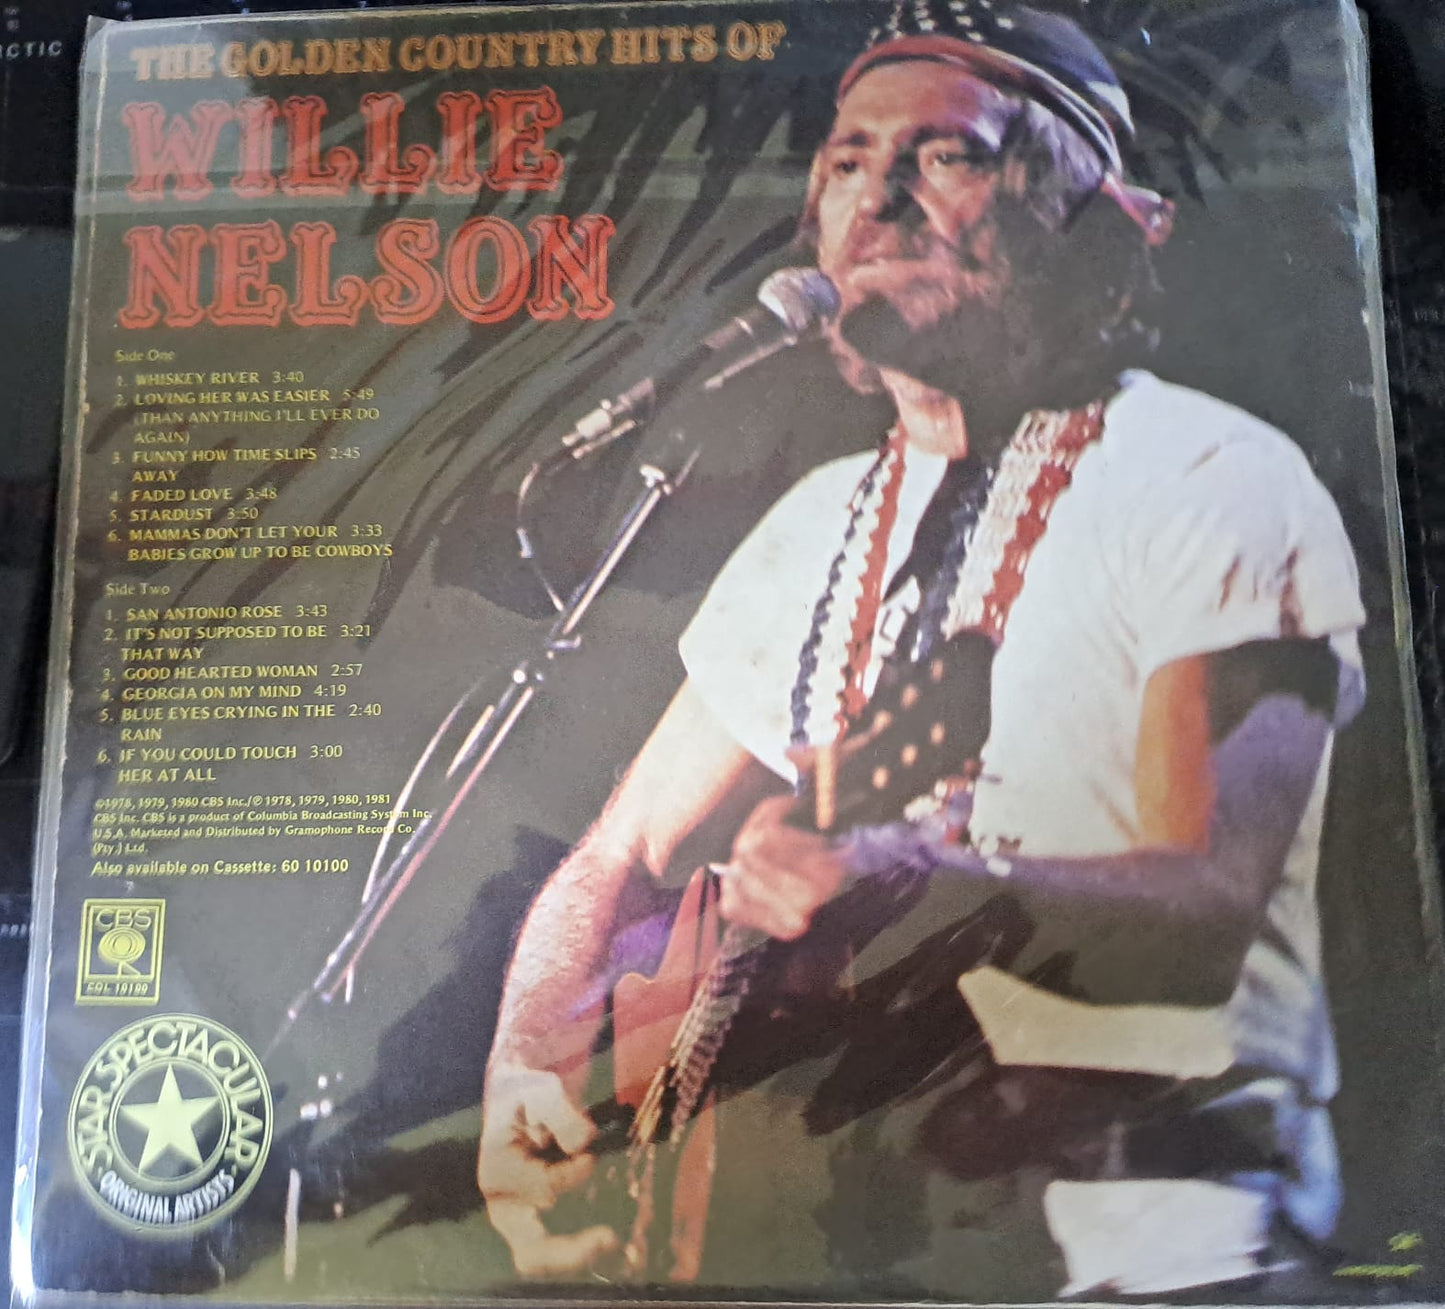 Willie Nelson - The Golden Country Hits Of Willie Nelson